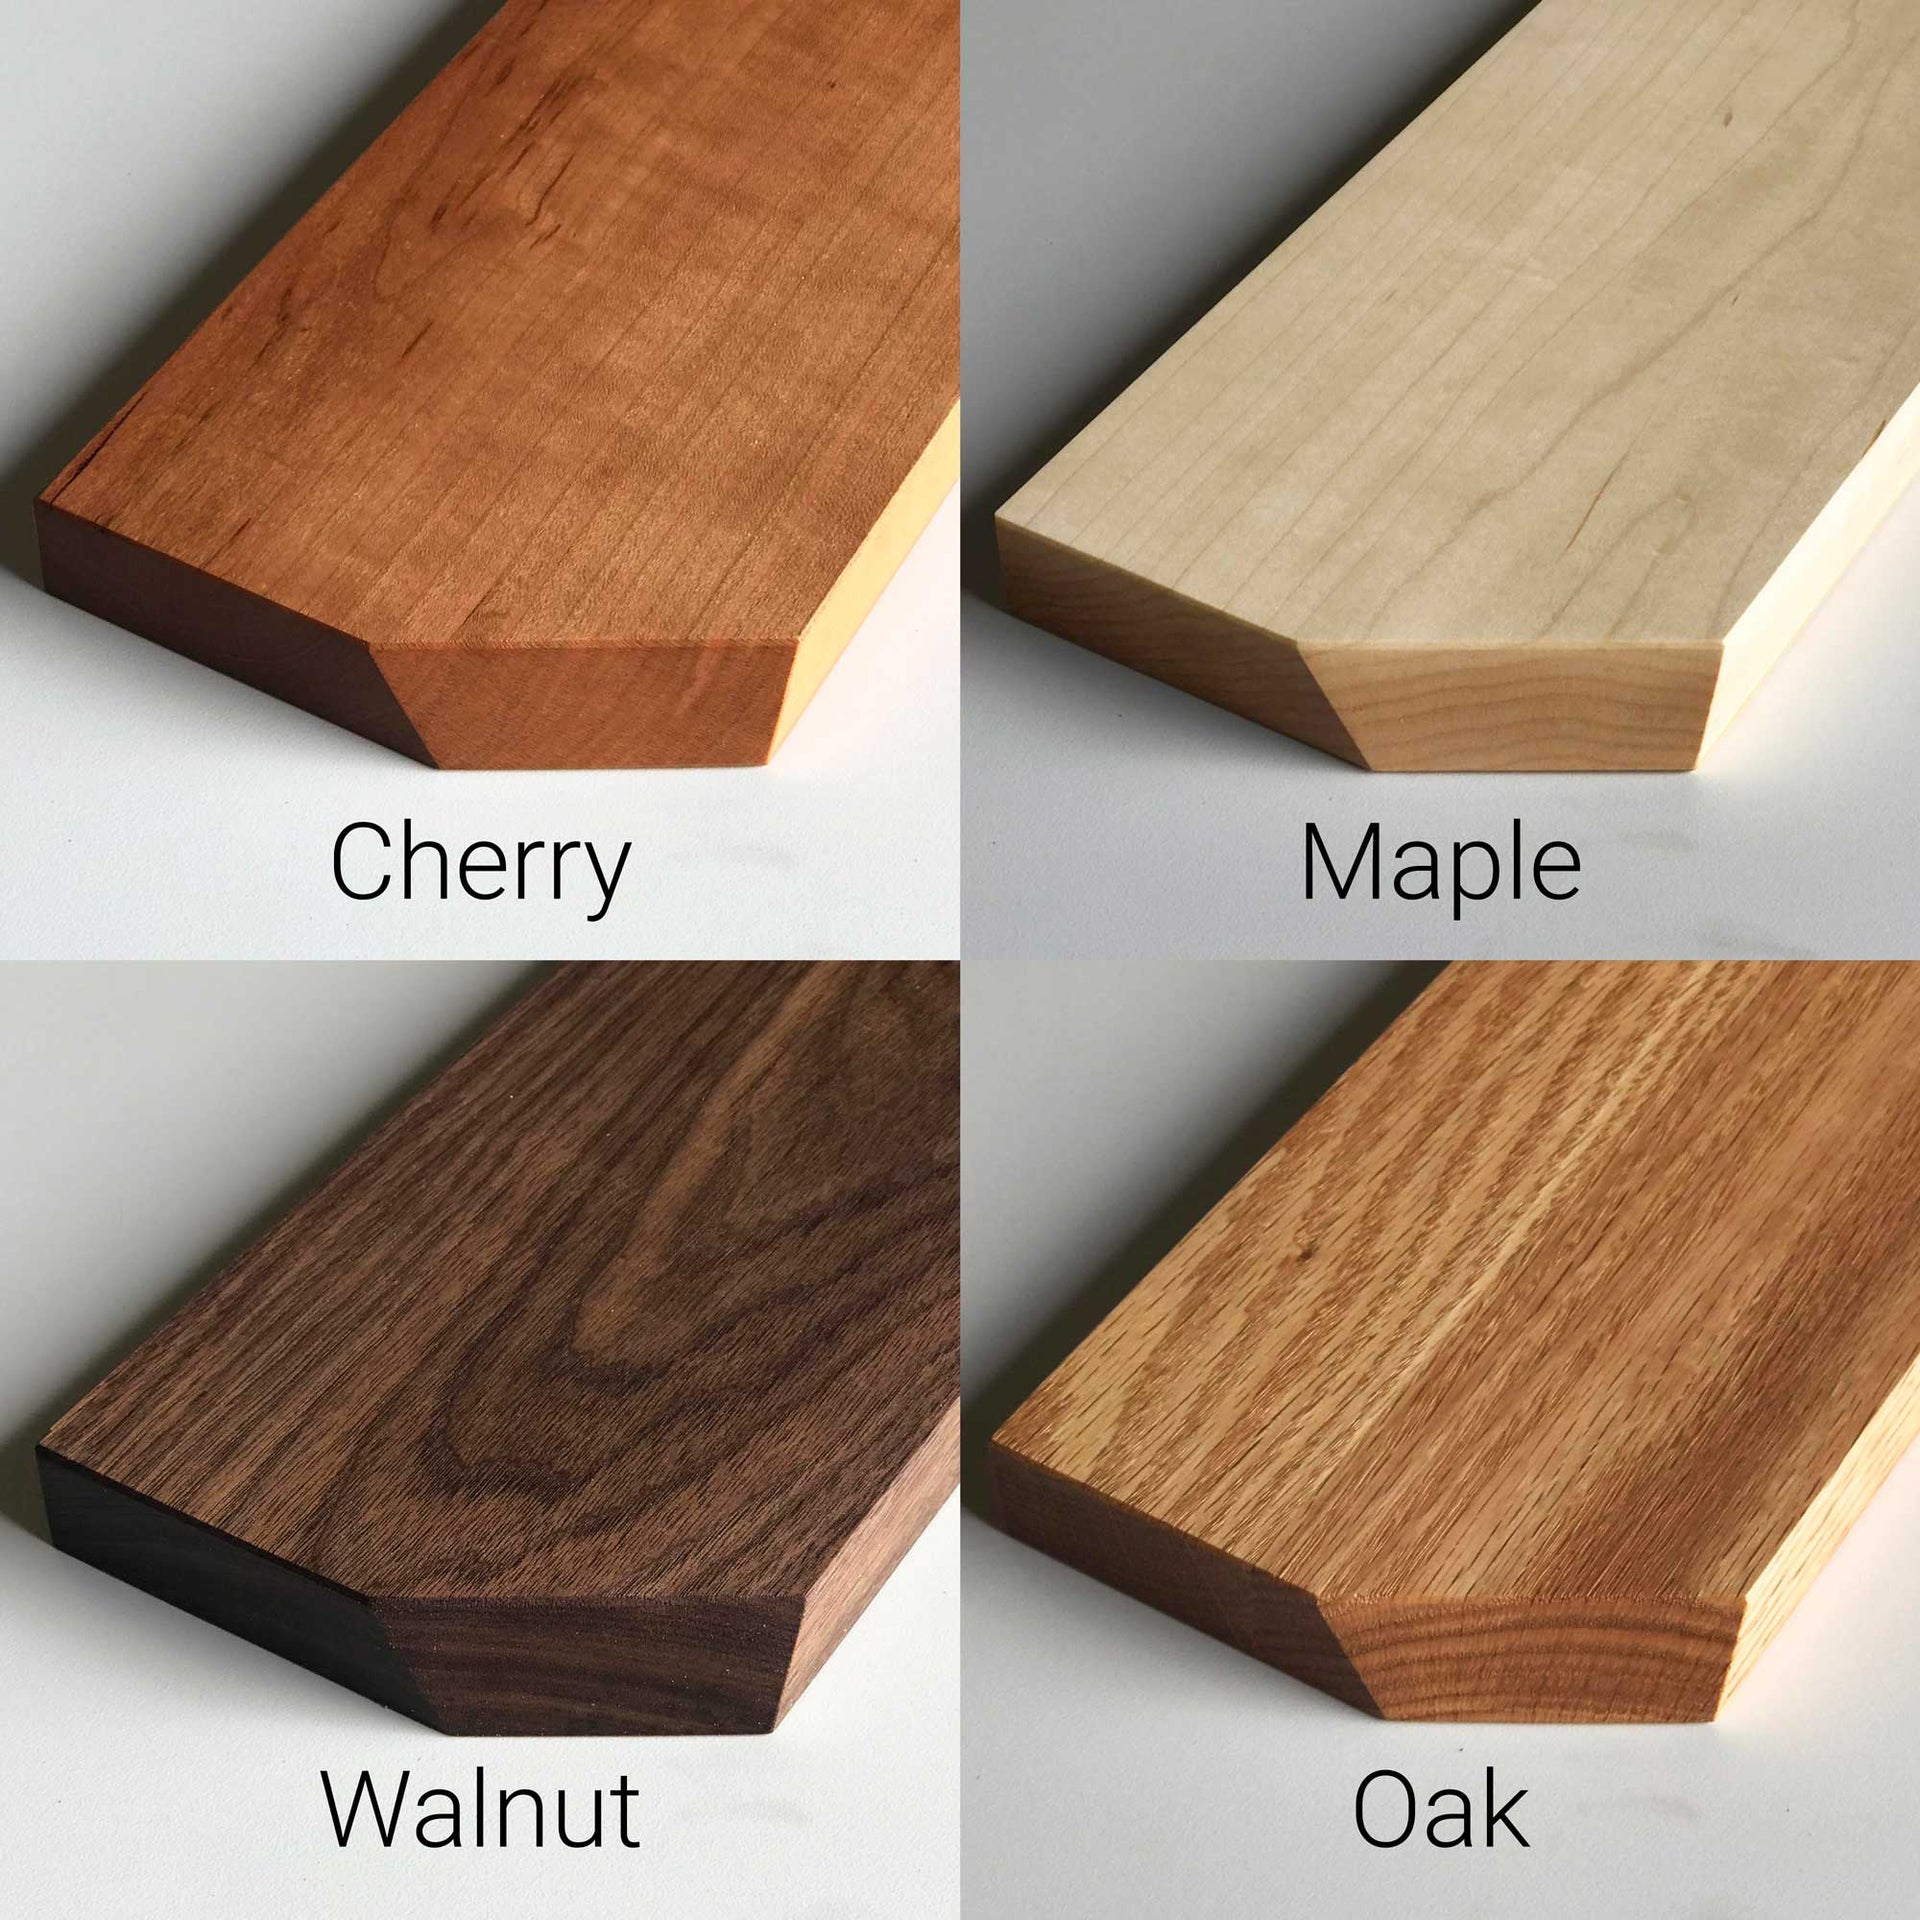 Solid wood samples in cherry, maple, walnut, and oak